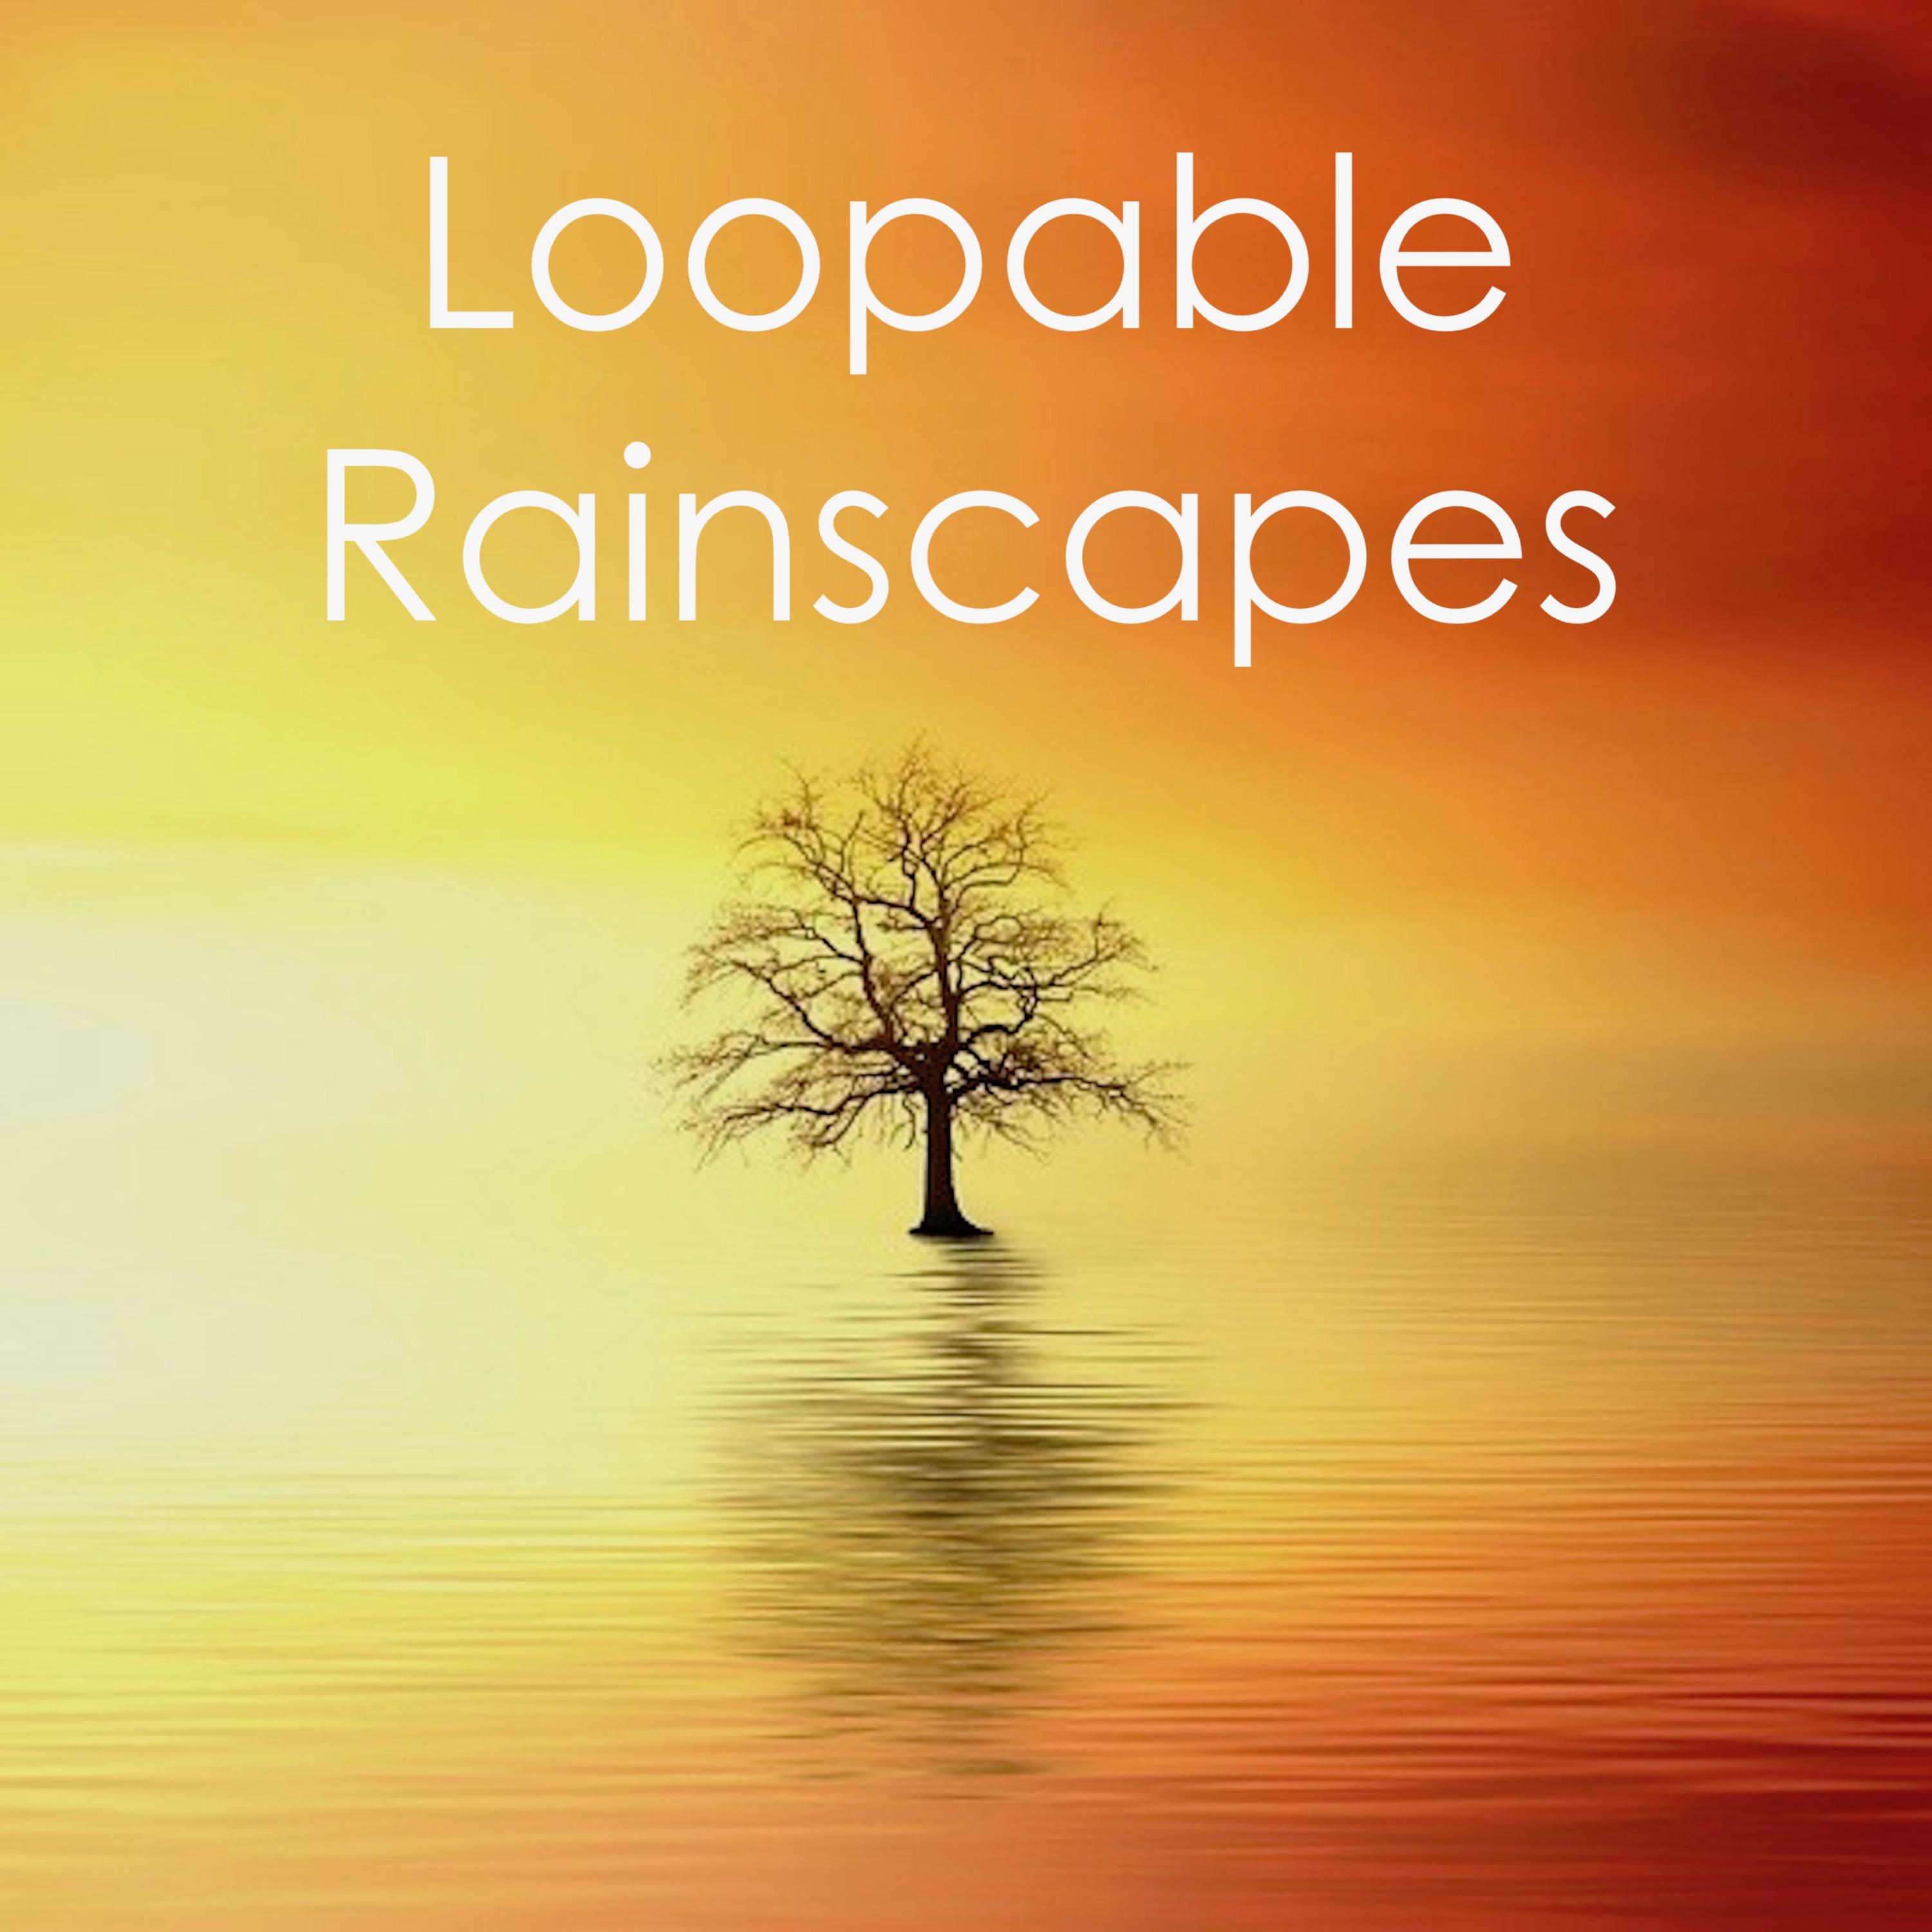 19 Relaxing Loopable Rainscapes